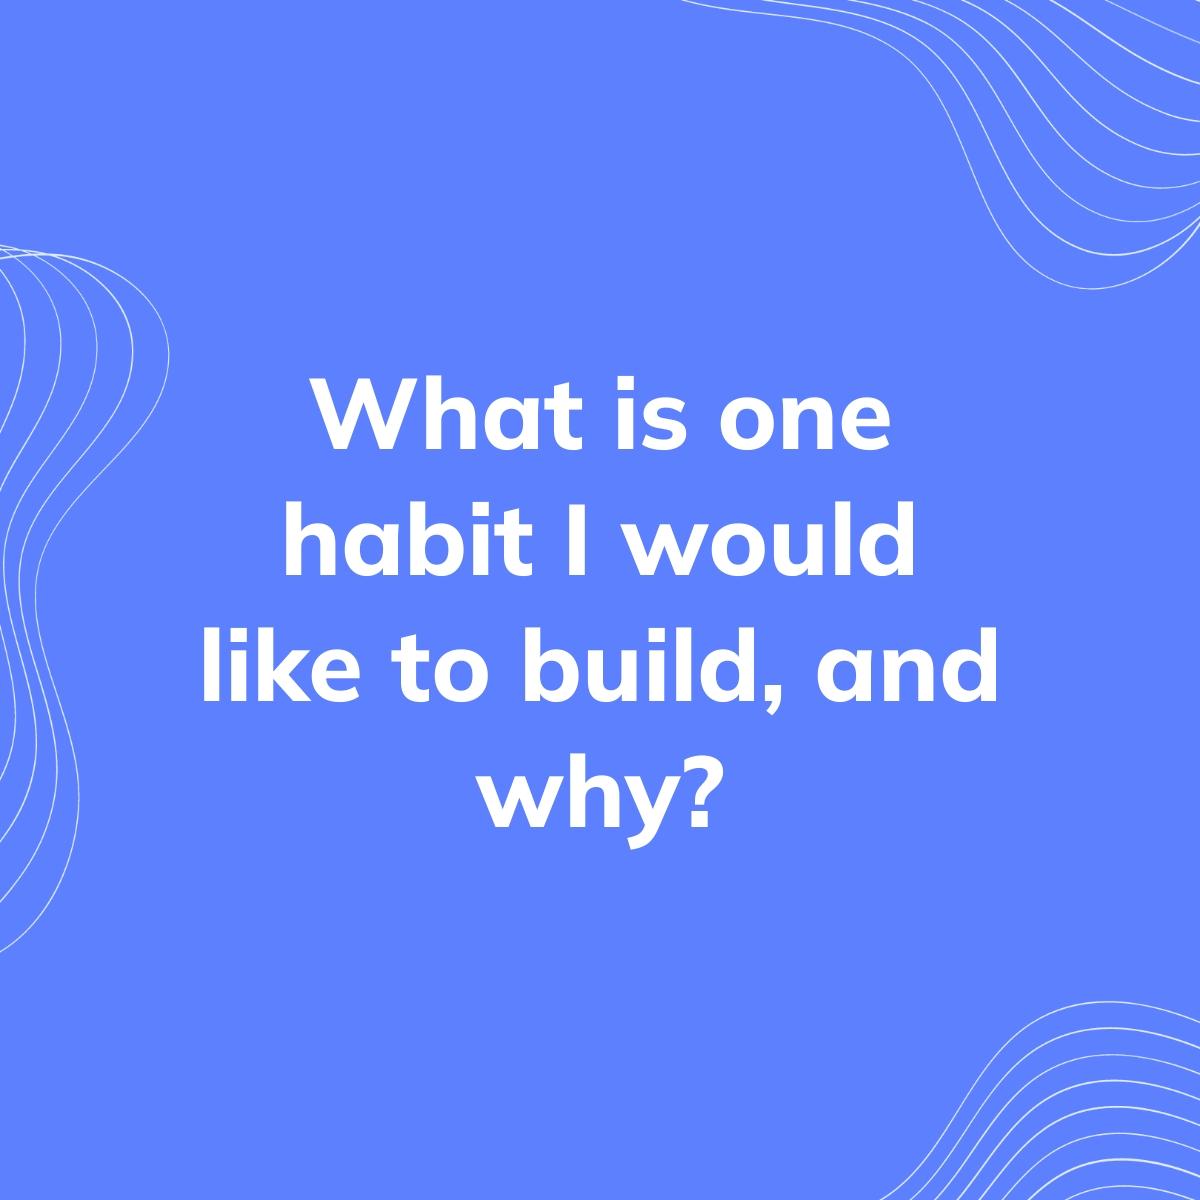 Journal Prompt: What is one habit I would like to build, and why?